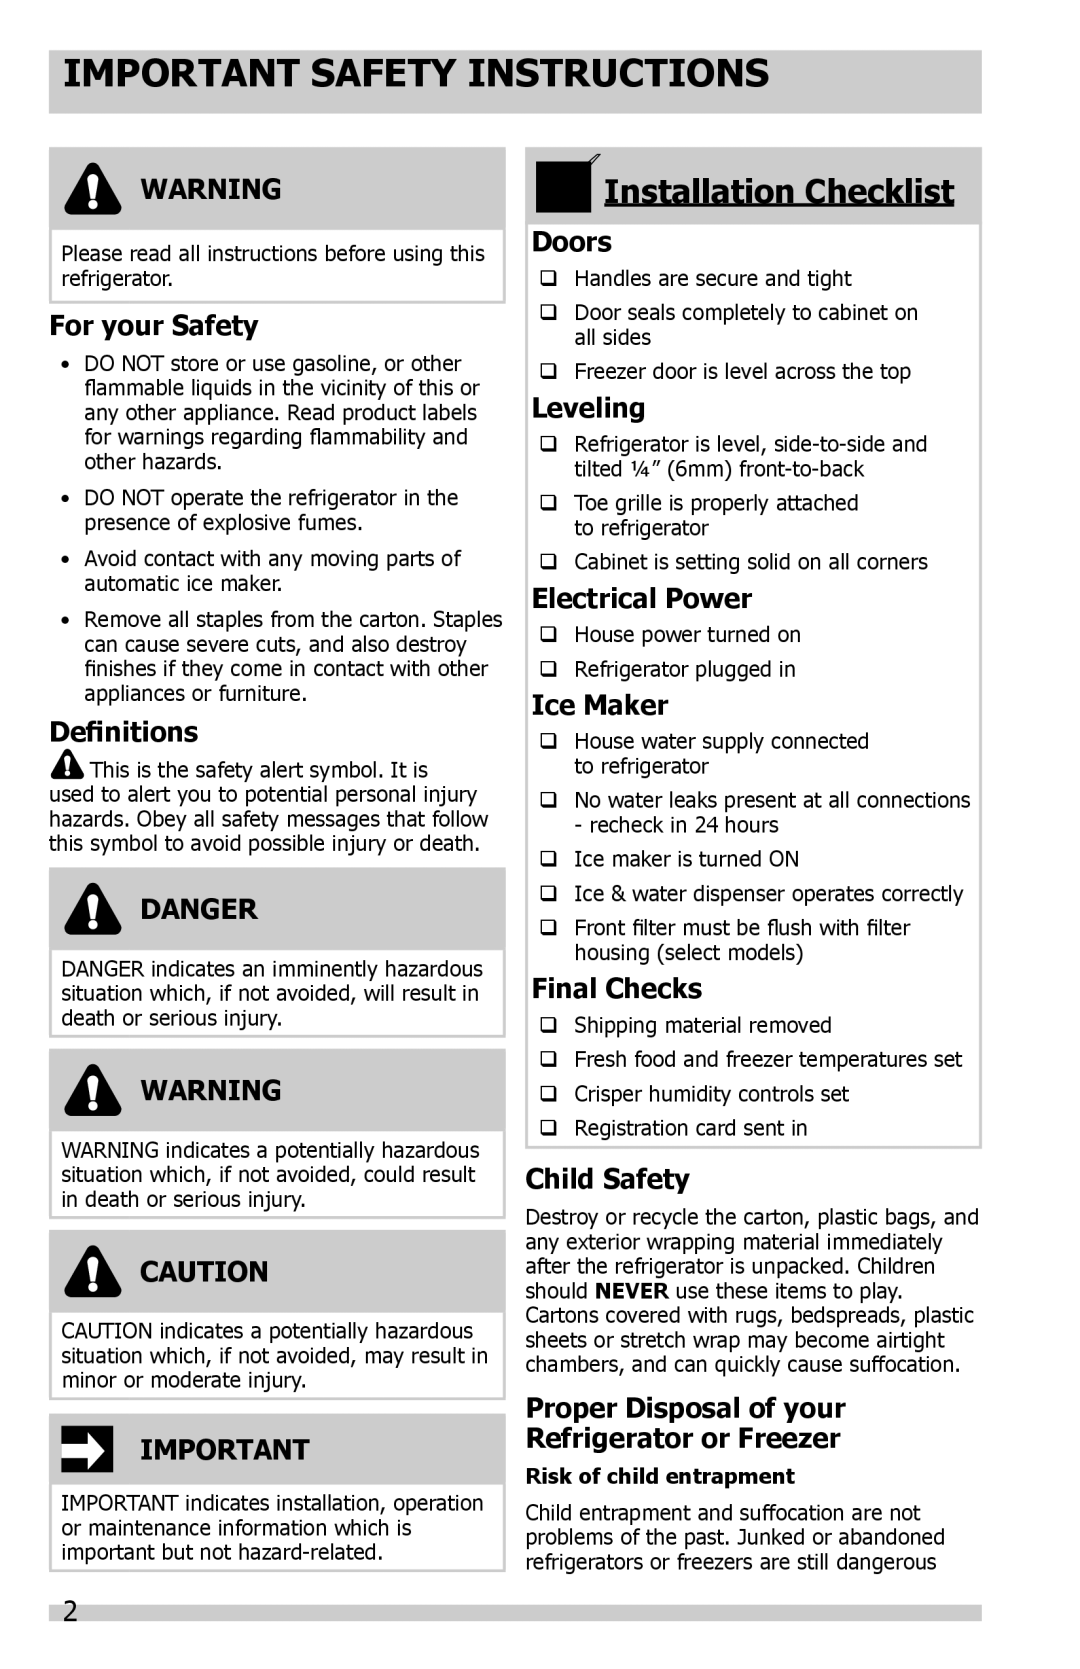 Frigidaire FGHC2331PF6 Important Safety Instructions, For your Safety, Definitions, Danger, Doors, Leveling, Ice Maker 